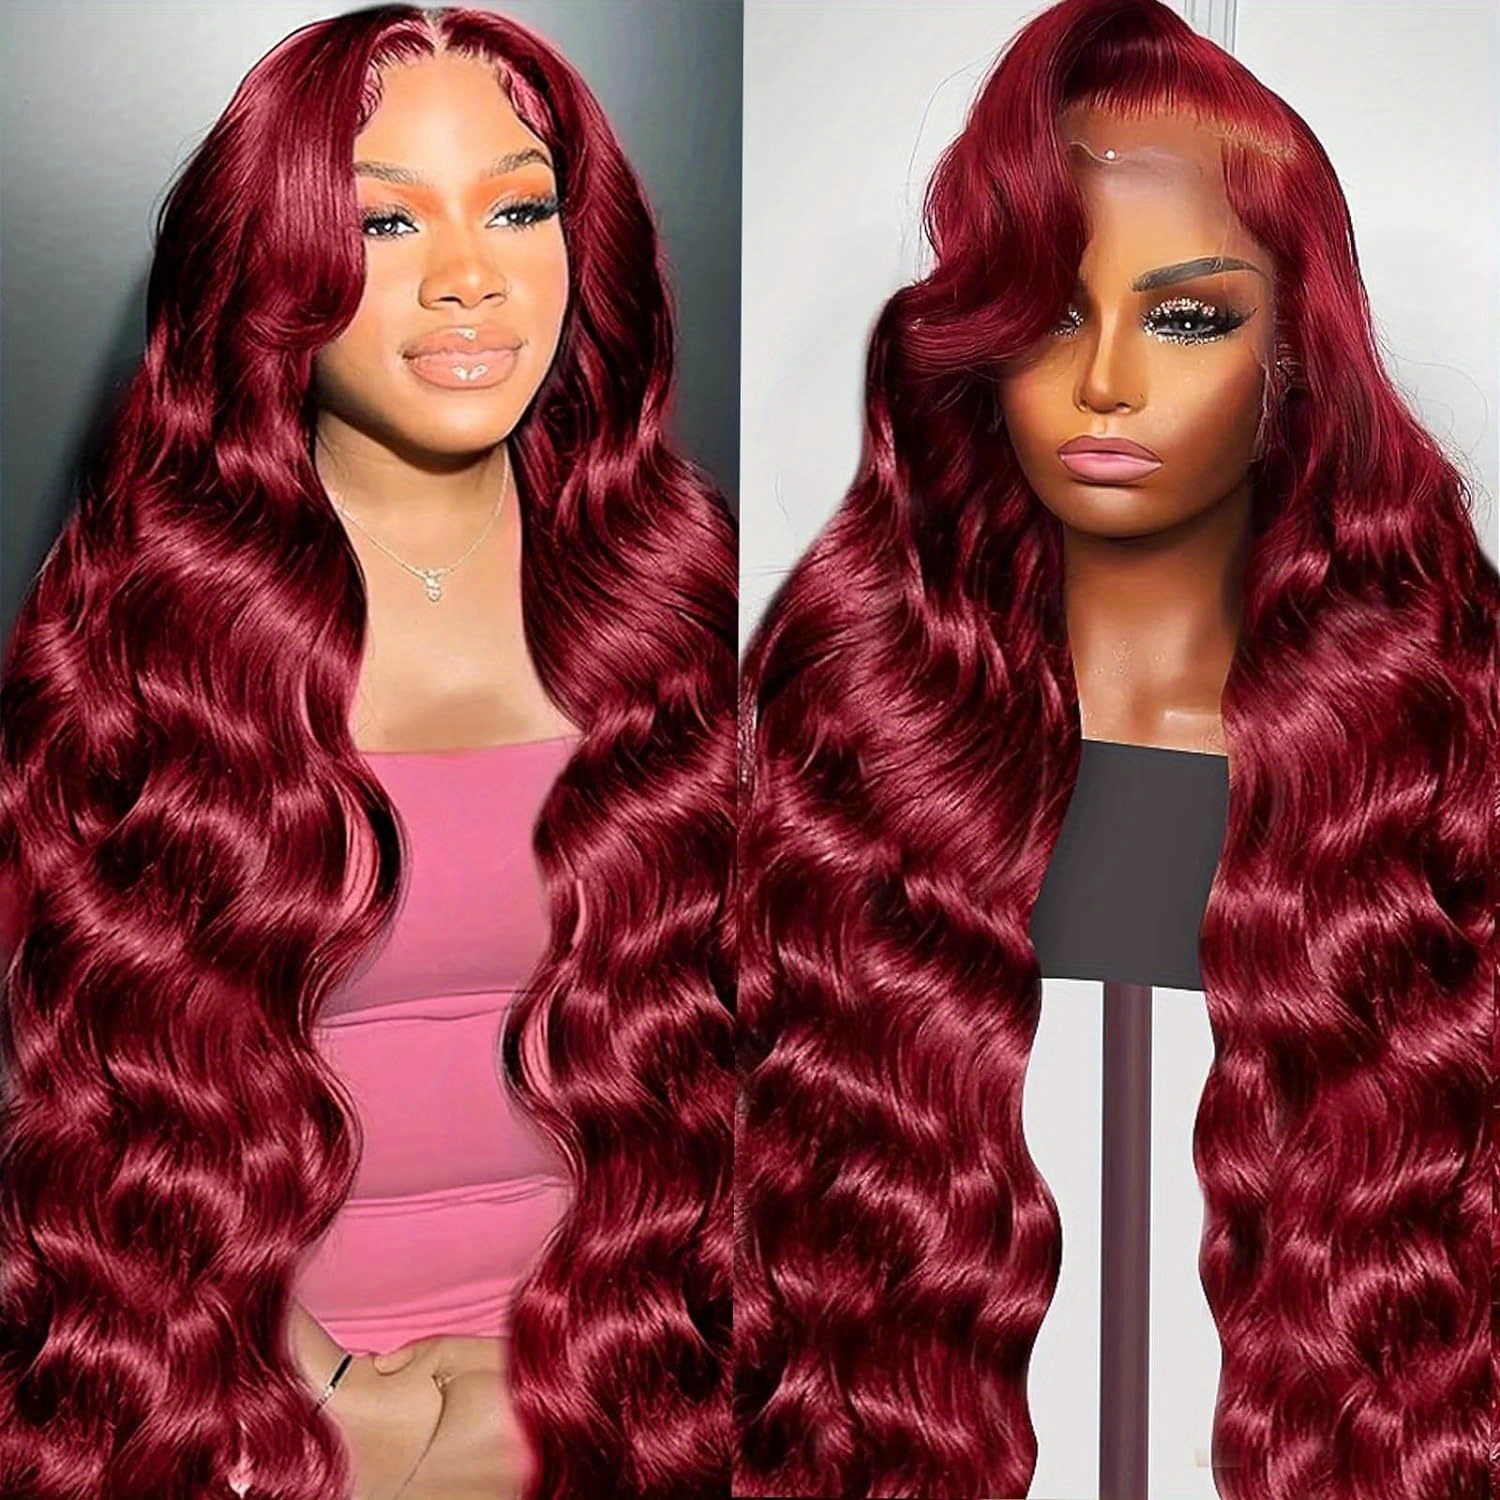 

Colass 14a 200% Density 30 Inch 99j Burgundy Lace Front Wigs Human Hair 13x4 99j Body Wave Lace Front Wigs Human Hair Red Colored Pre Plucked Glueless Hd Lace Frontal Wigs For Women.